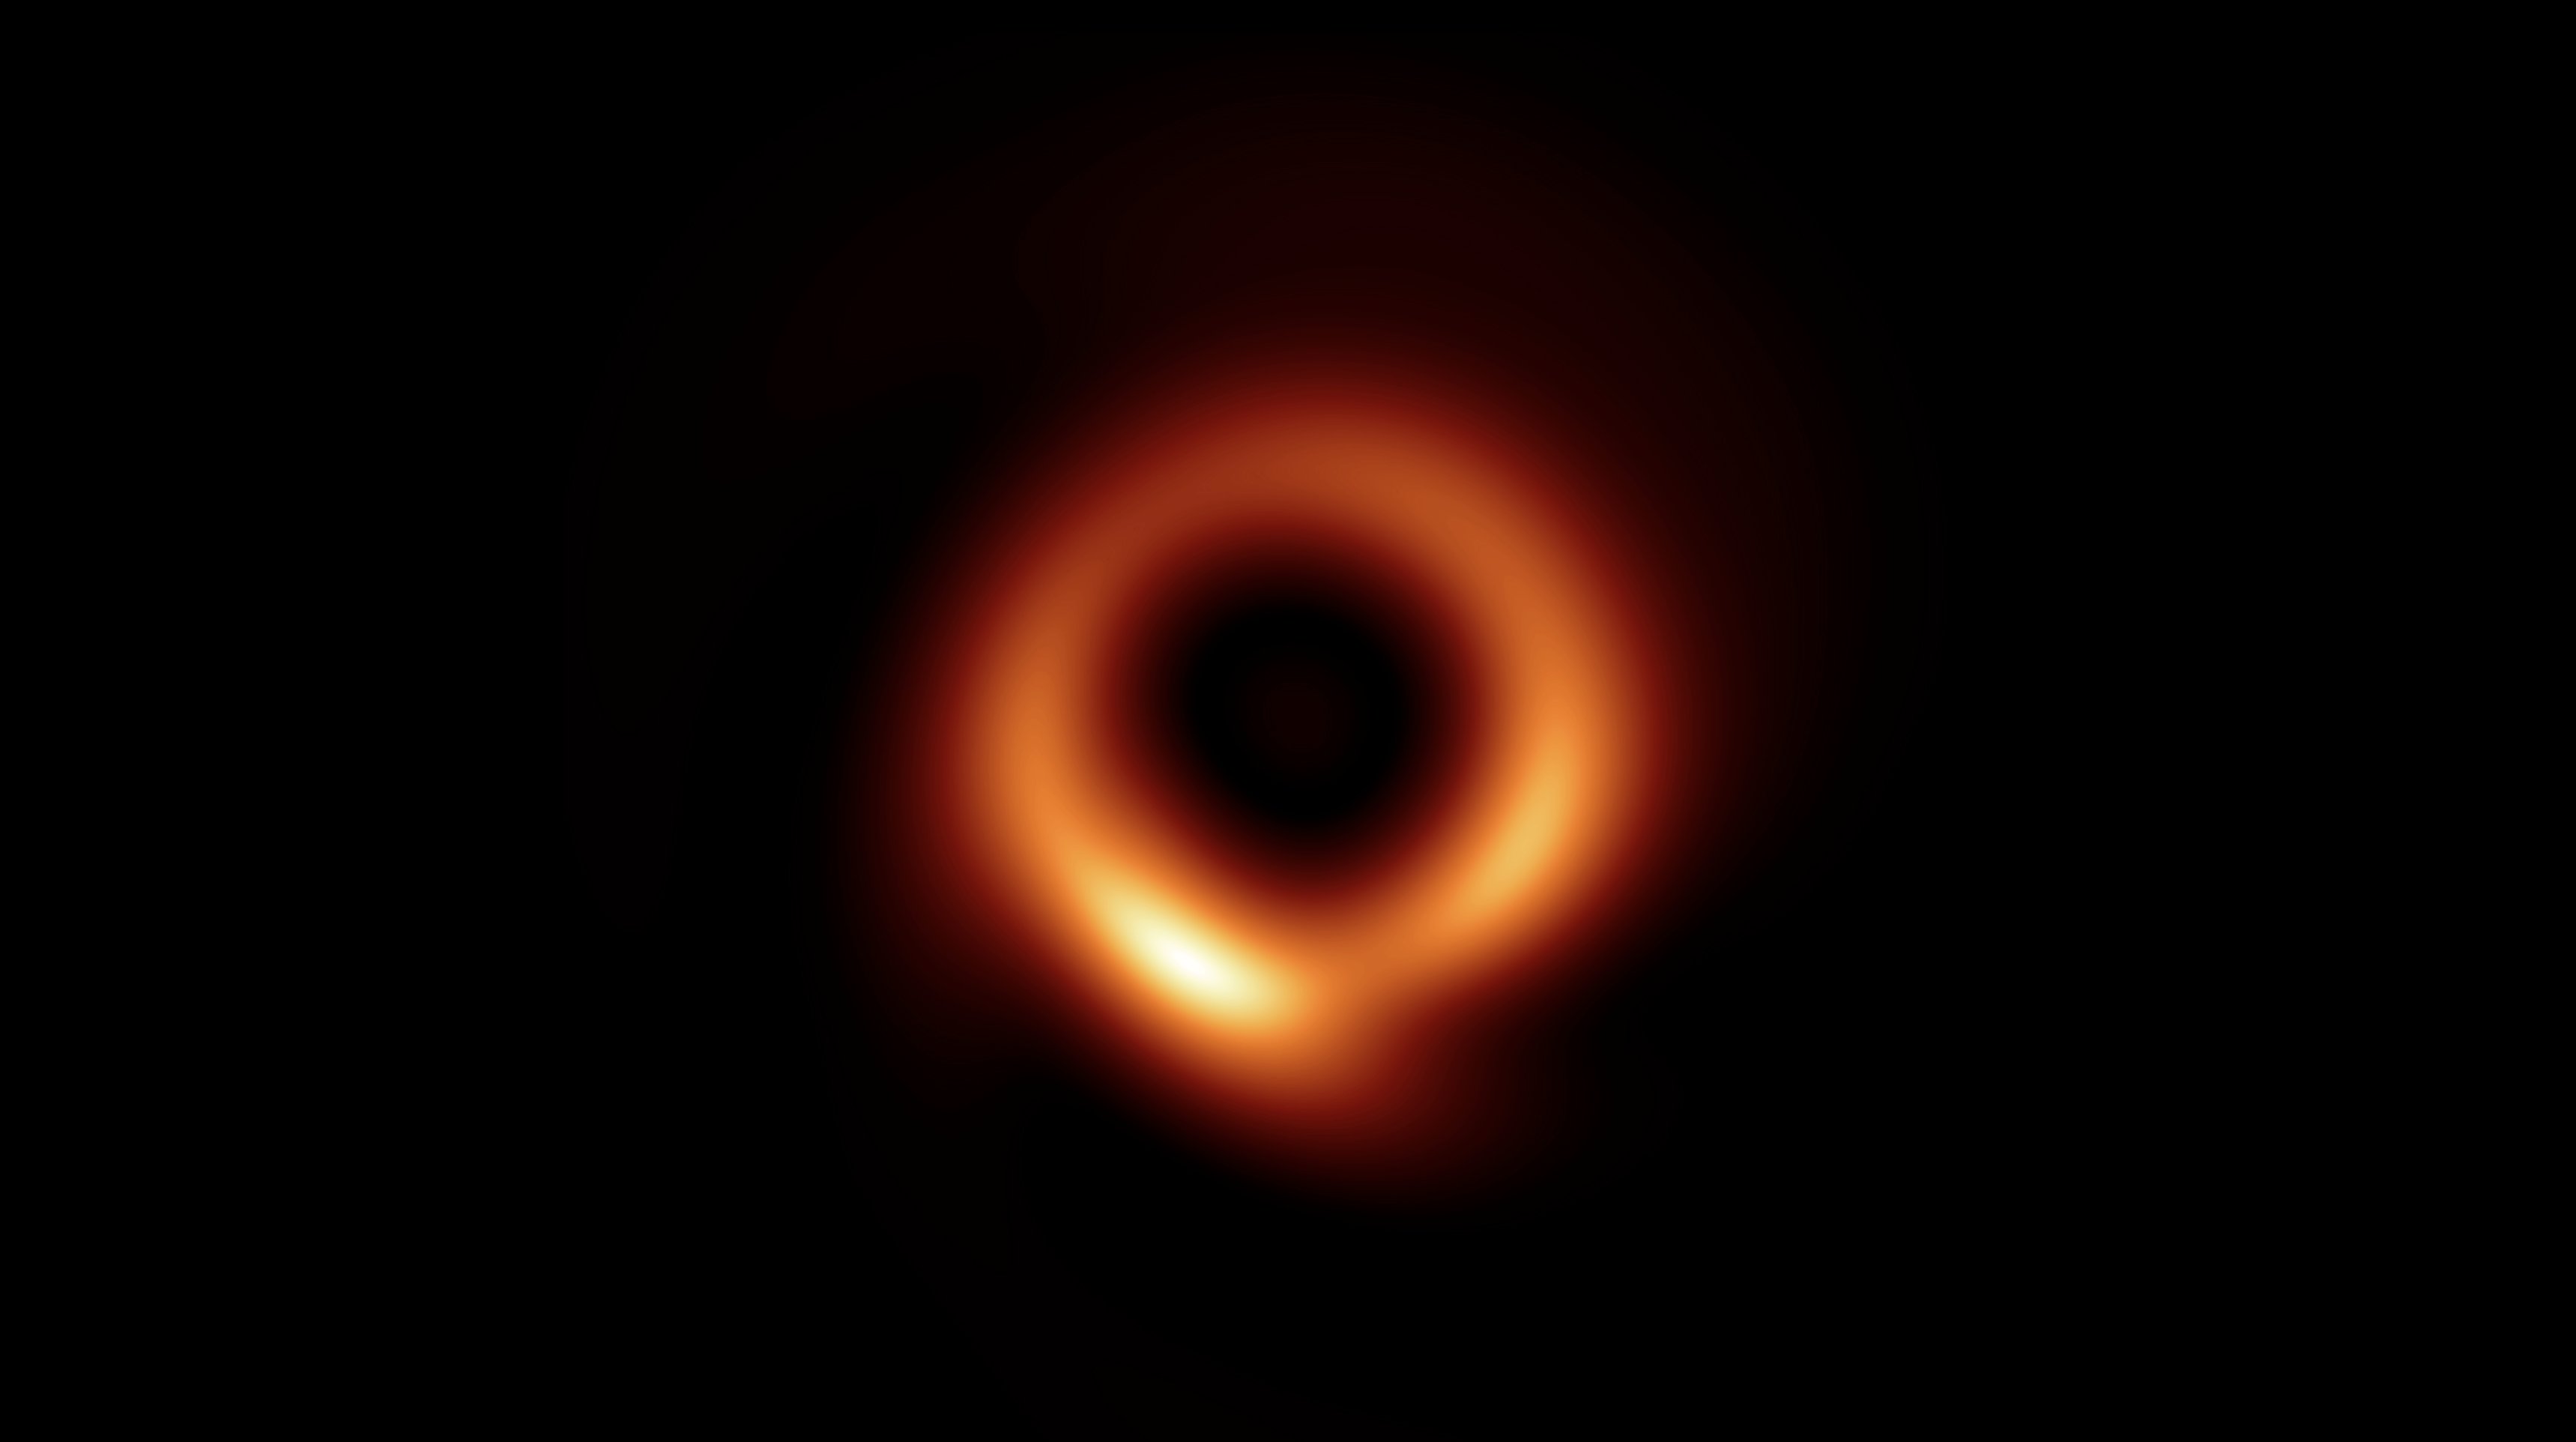 Meet the ‘Event Horizon Explorer’, Which Aims to See Light Rings Around Black Holes thumbnail